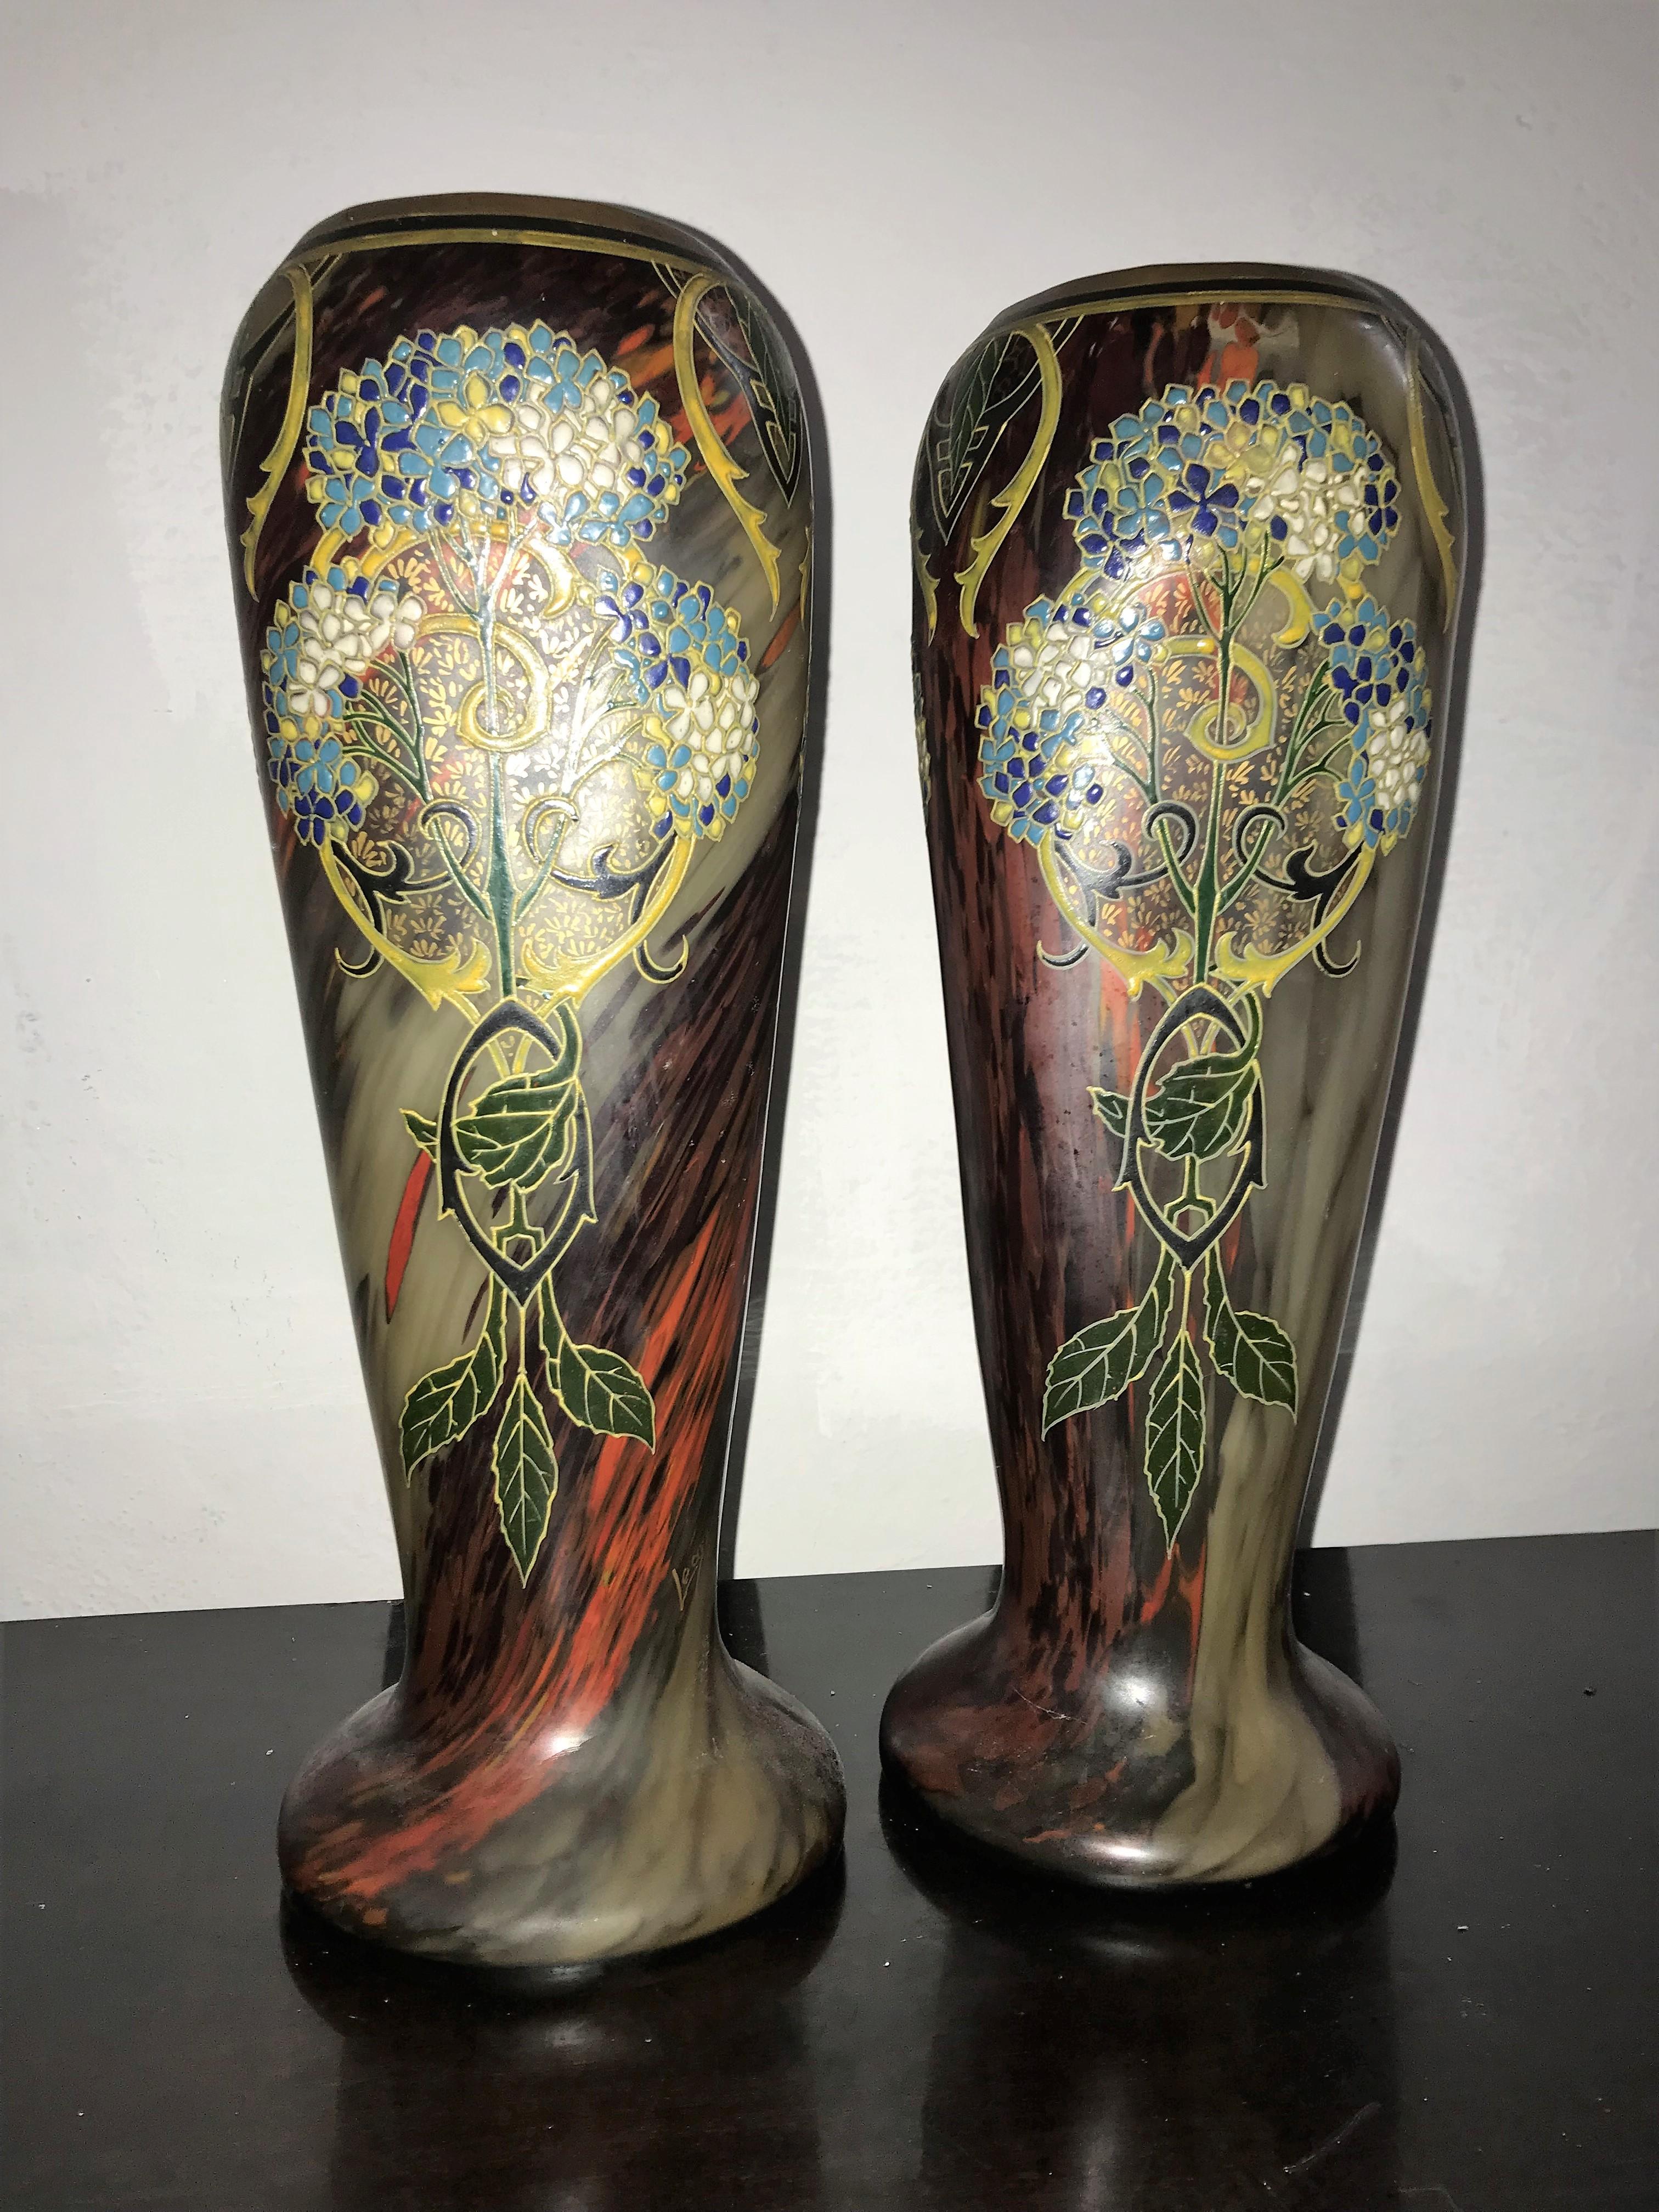 Late 19th Century Pair of Large Art Nouveau Blown Glass and Enamel Vases by Legras, France For Sale